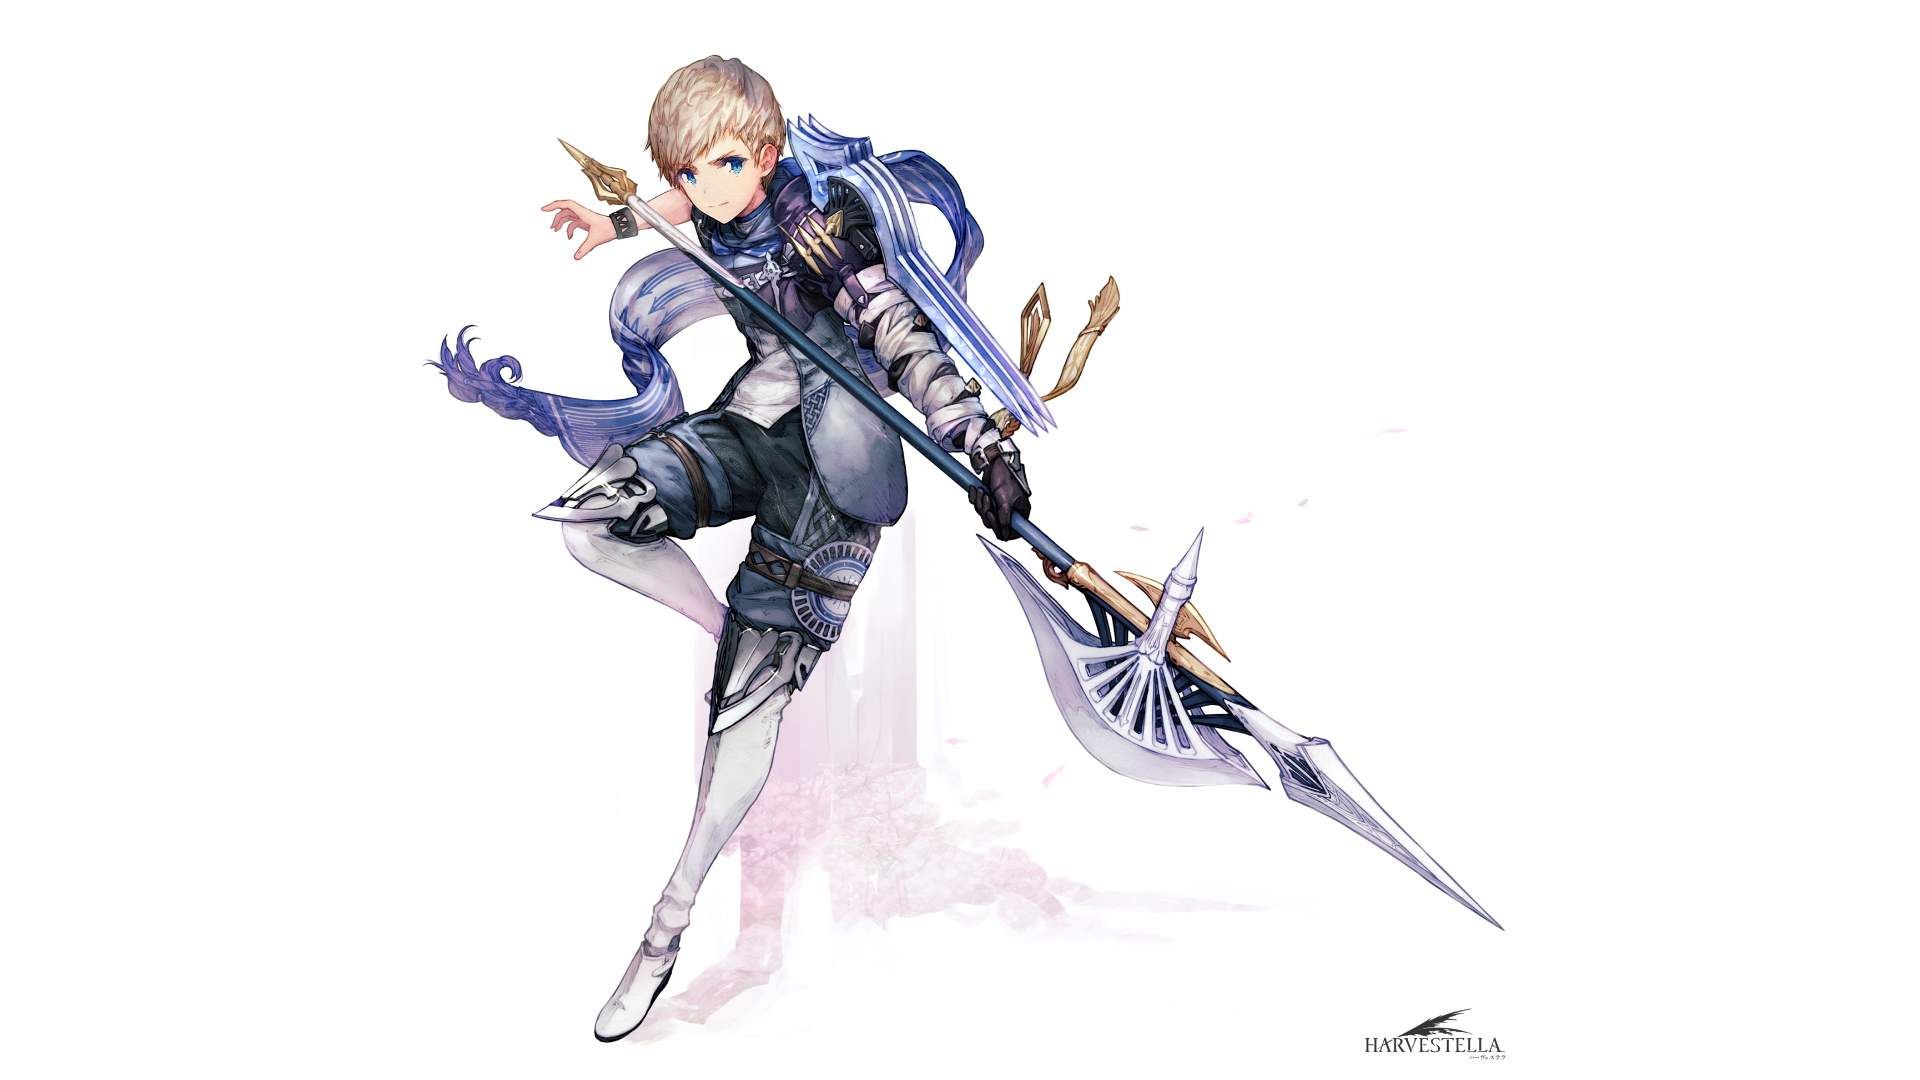 Character art for Asyl from Harvestella. He looks like a young man or boy. He has an elegant spear, long white boots, and light silver armour, along with blue strands of cloth like a scarf or ribbon. He is stood like he's in motion and has short blond hair and blue eyes.